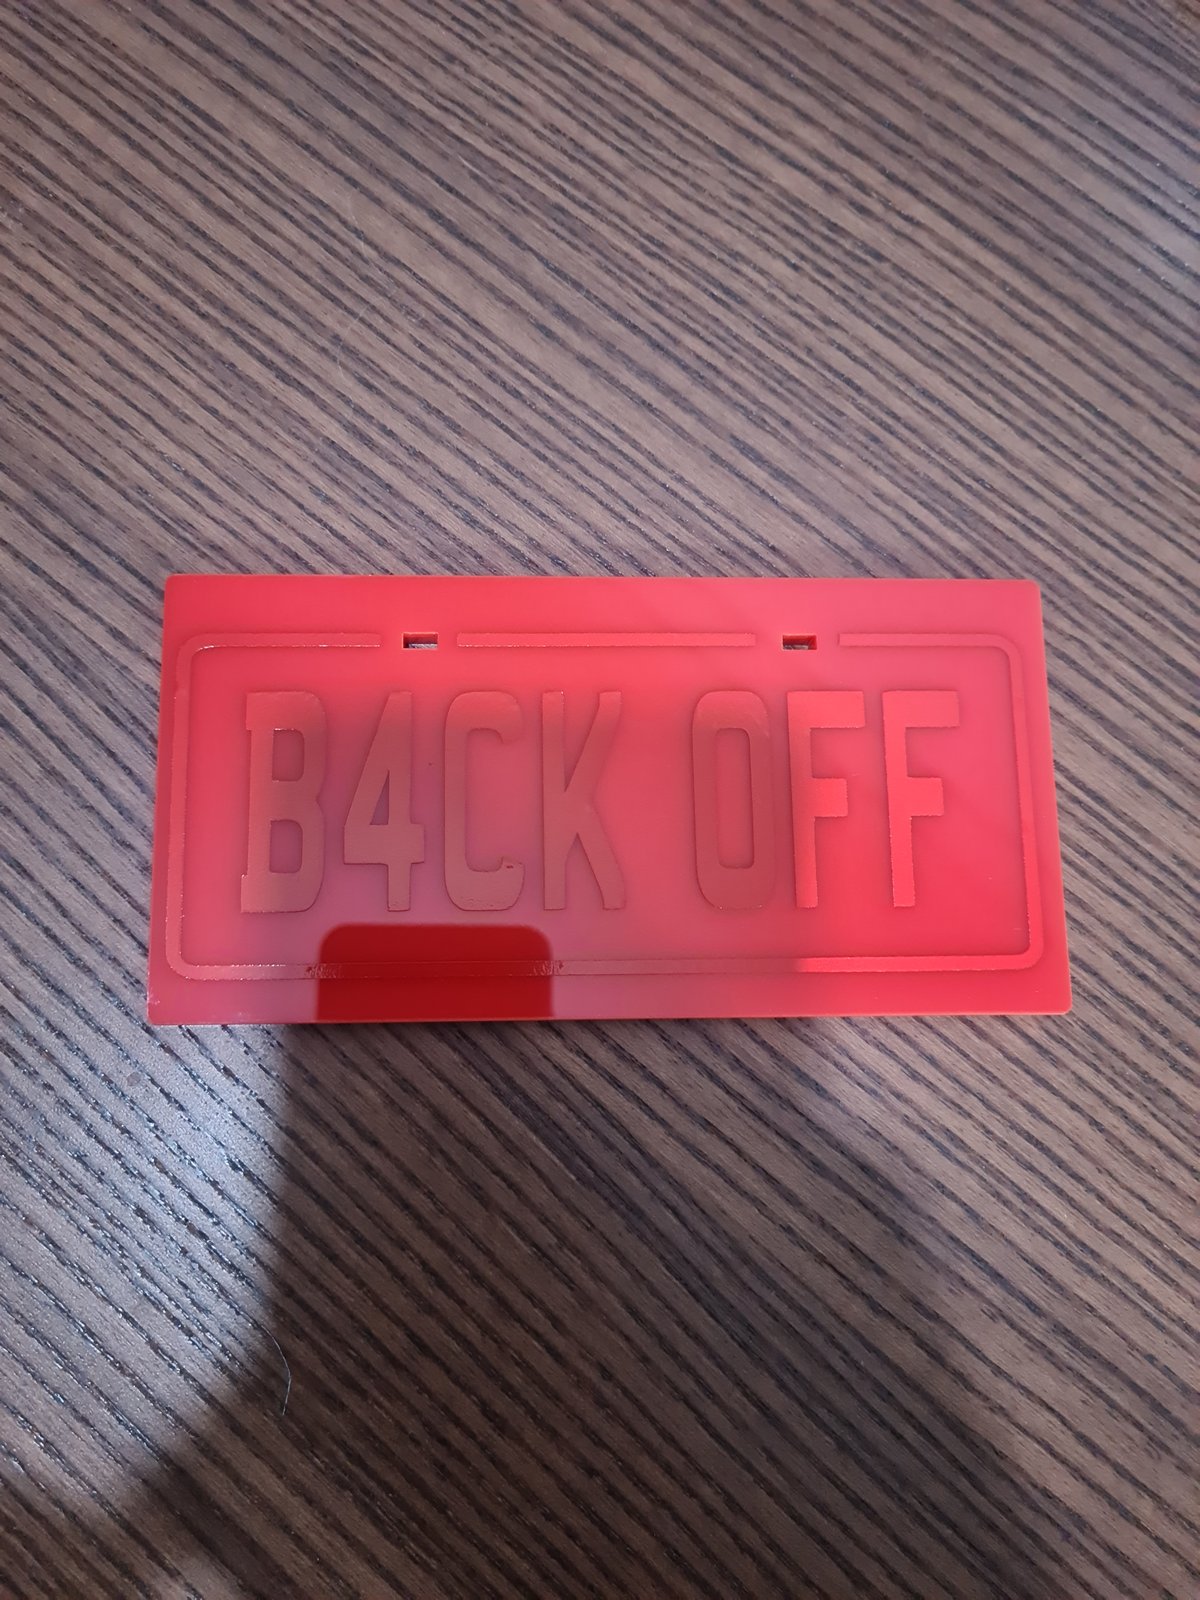 Image of *deadstock* B4CK 0FF Plate *